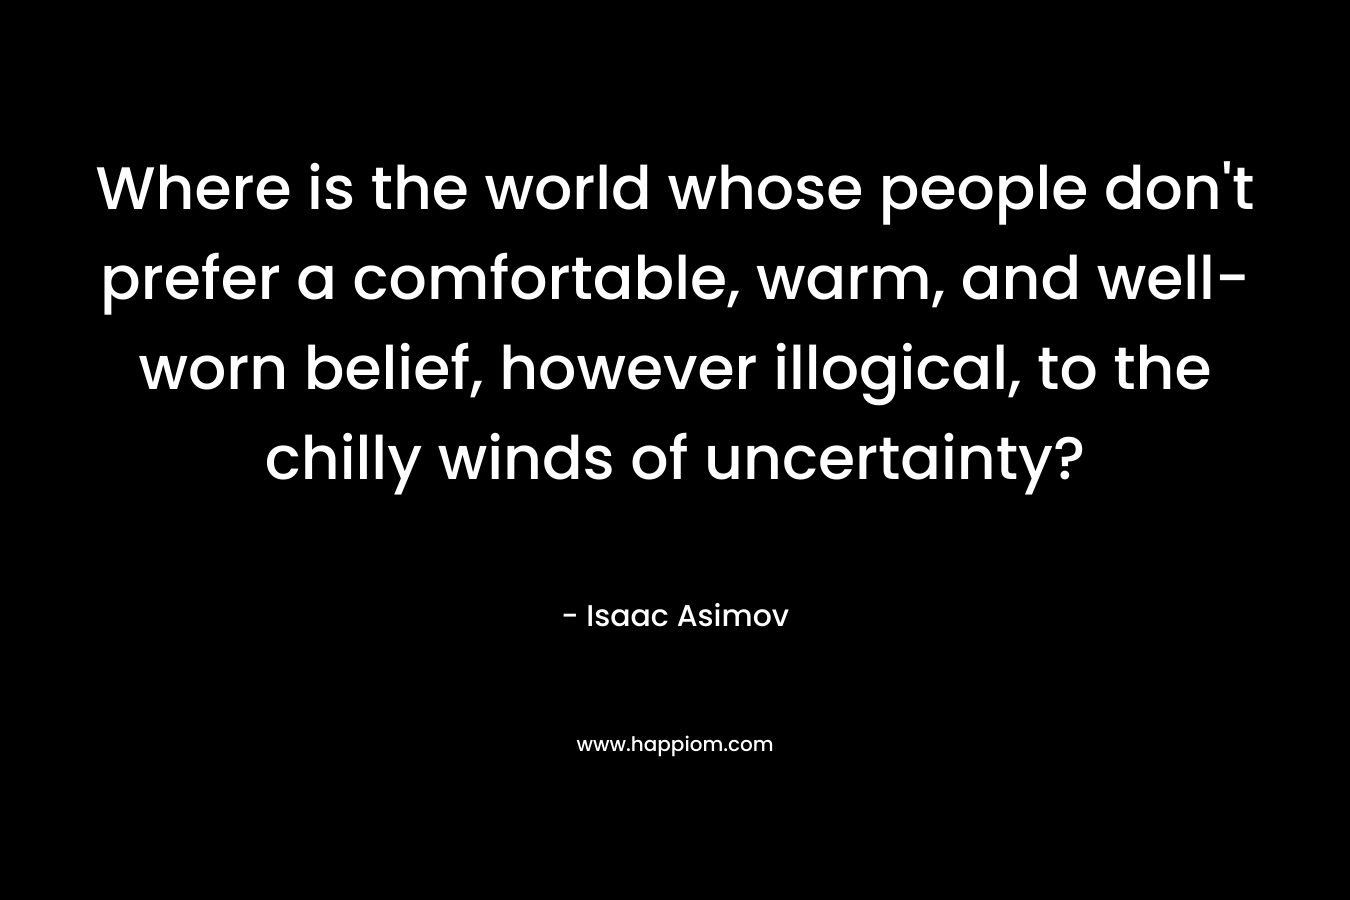 Where is the world whose people don't prefer a comfortable, warm, and well-worn belief, however illogical, to the chilly winds of uncertainty?